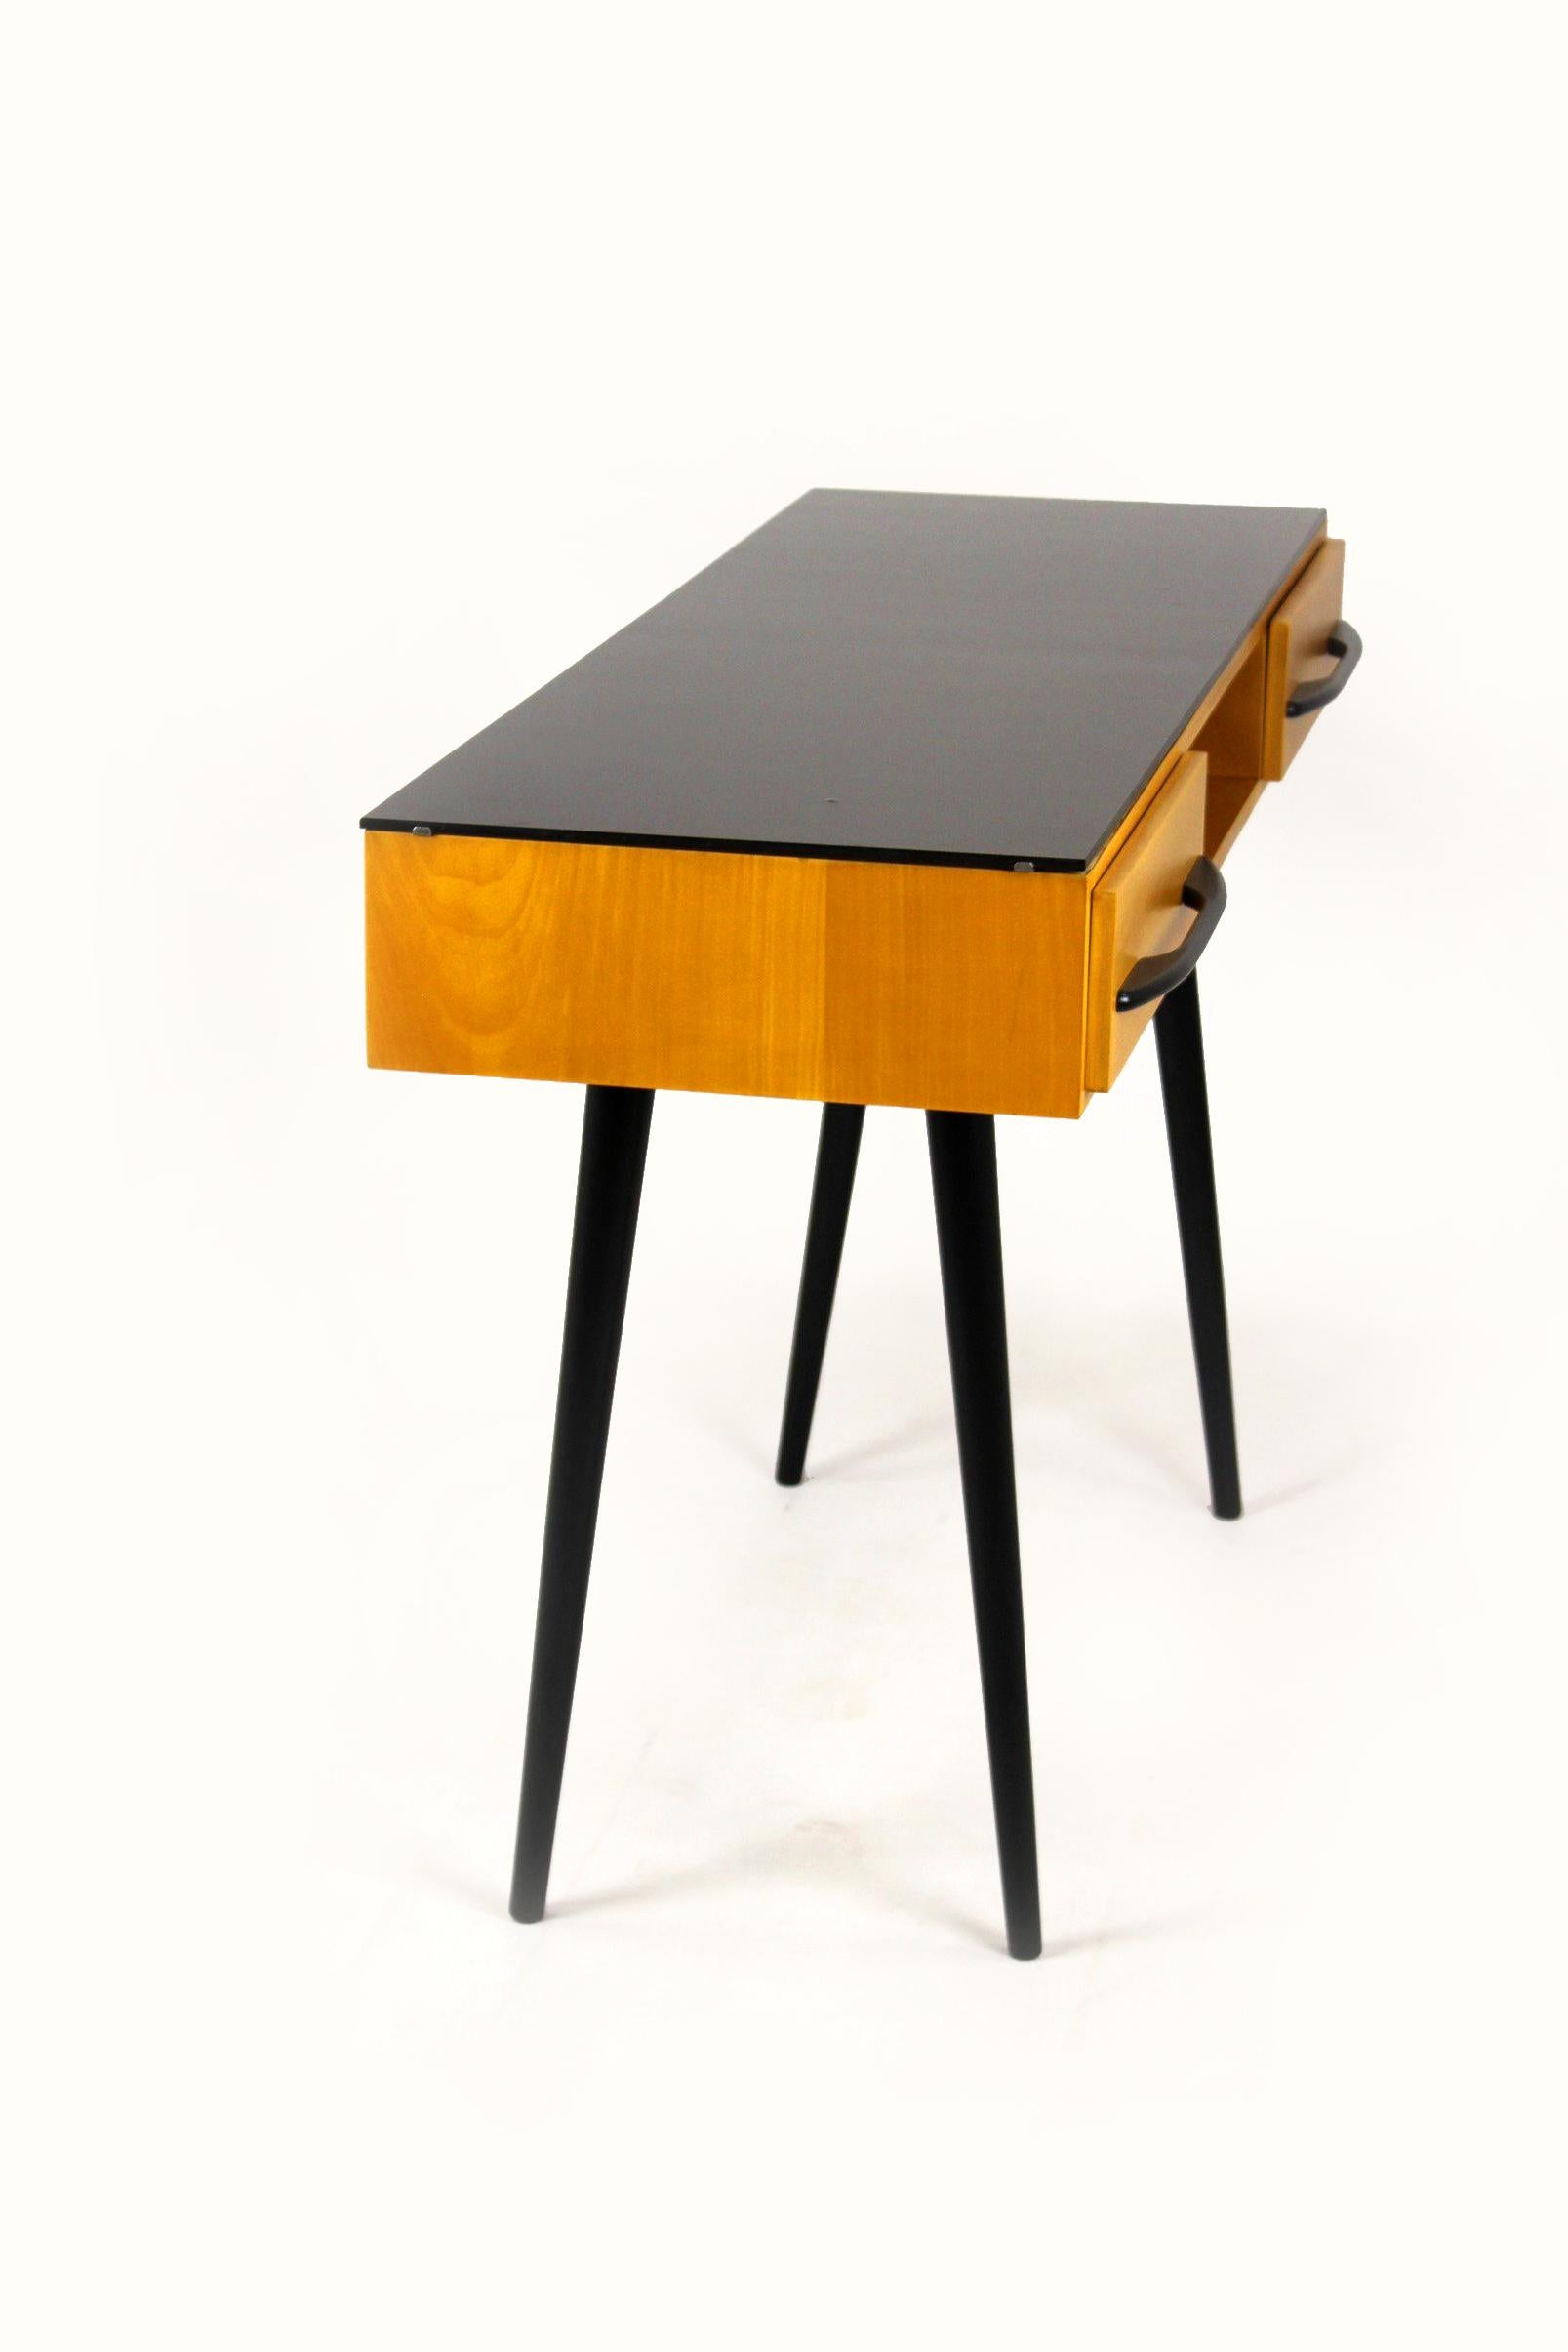 Midcentury Writing Desk or Console Table from Up Zavody, 1960s For Sale 10